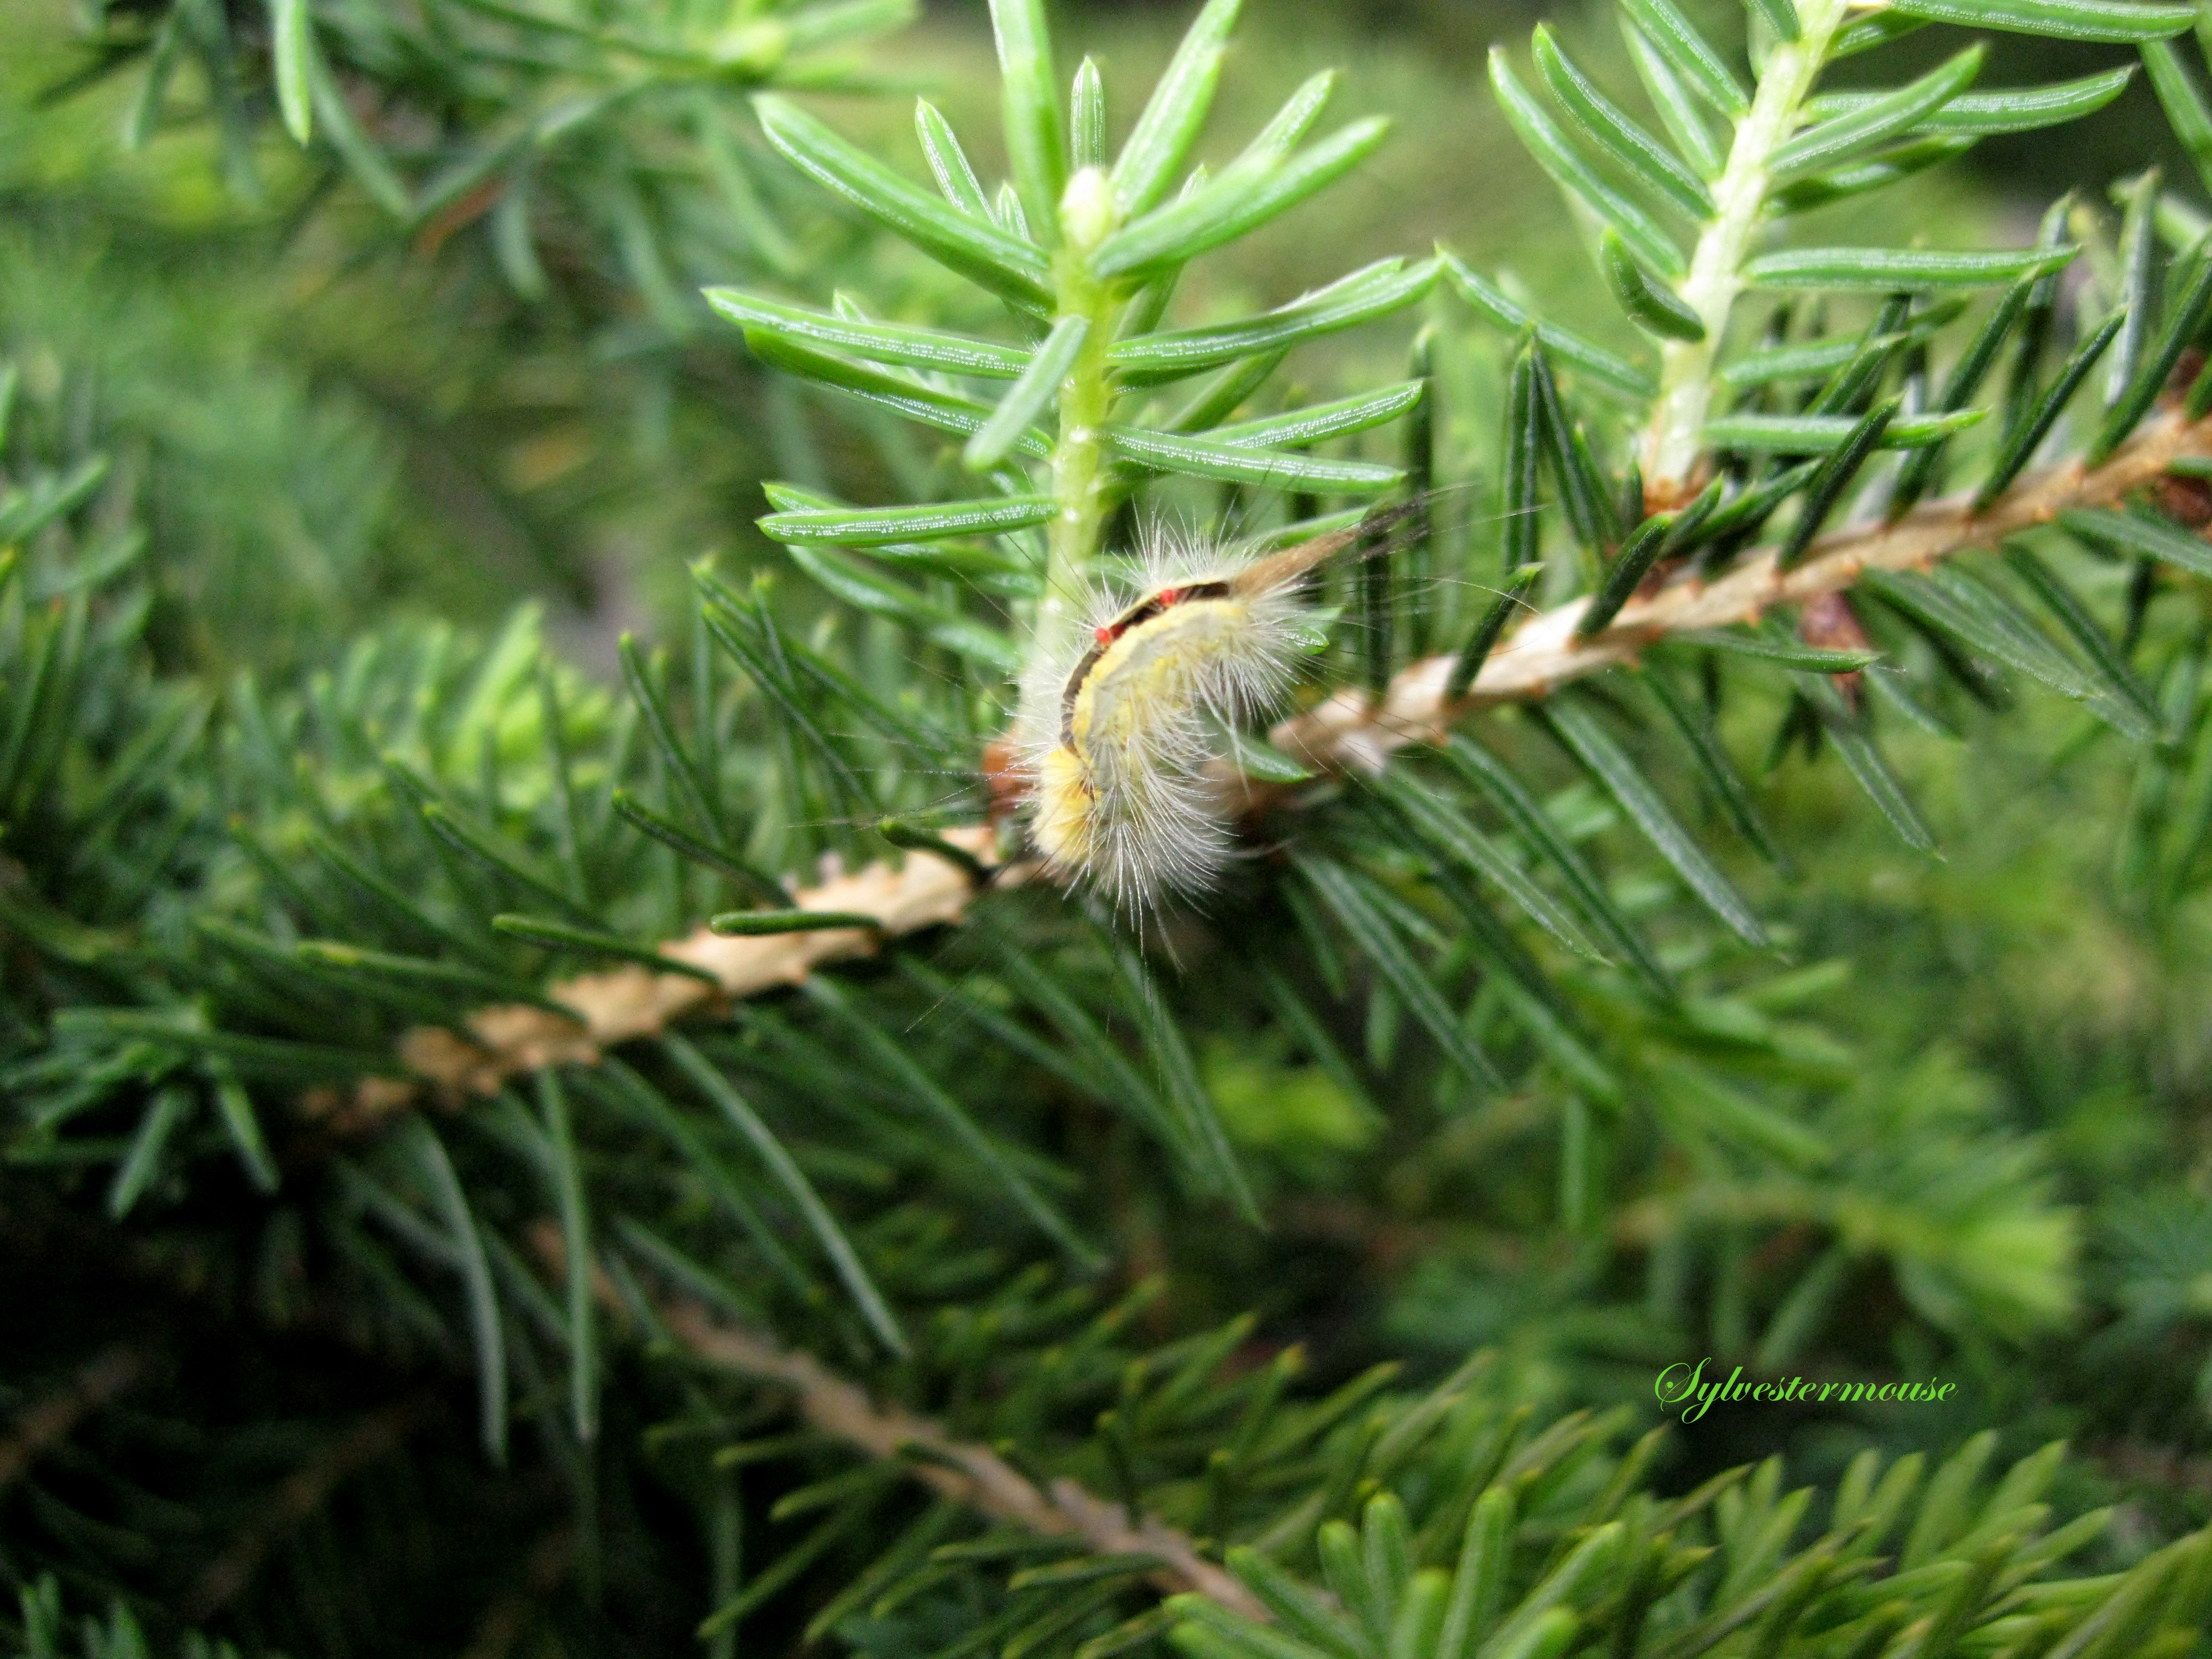 Caterpillar Photo: Nature's Camouflage - Photography by Sylvestermouse